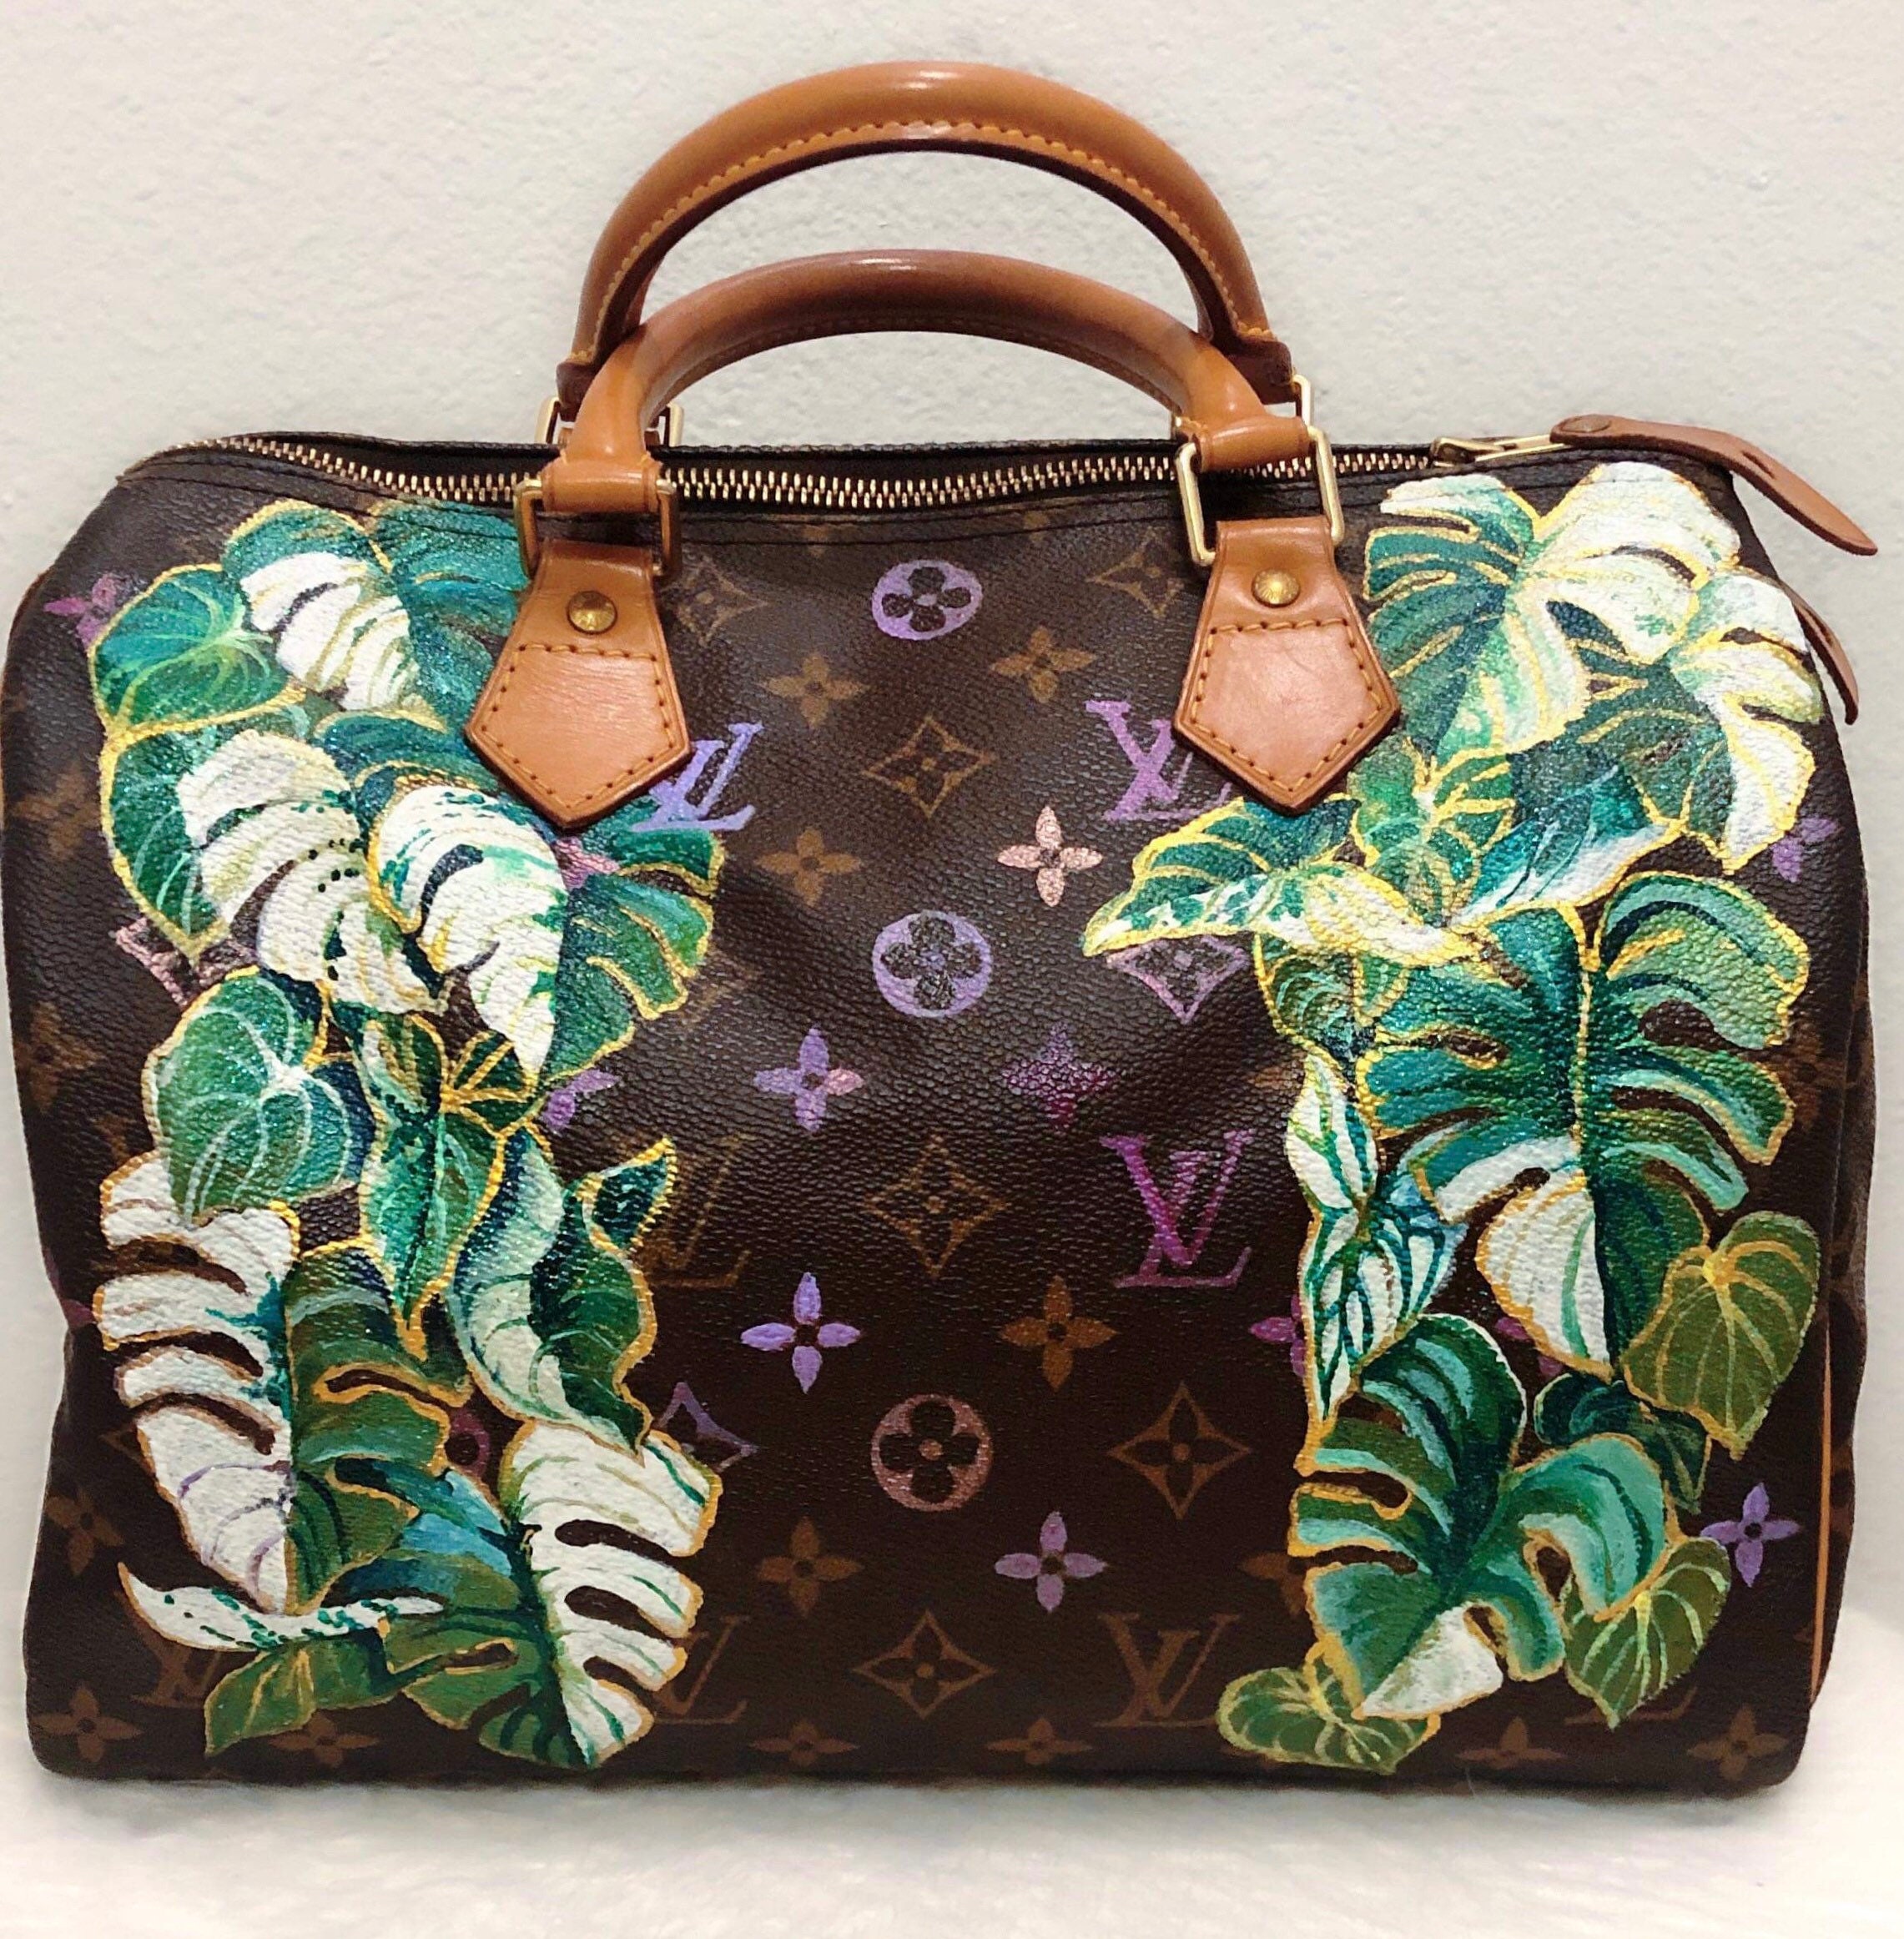 Louis Vuitton, Bags, Lv Customized With Hand Painted Art Addons